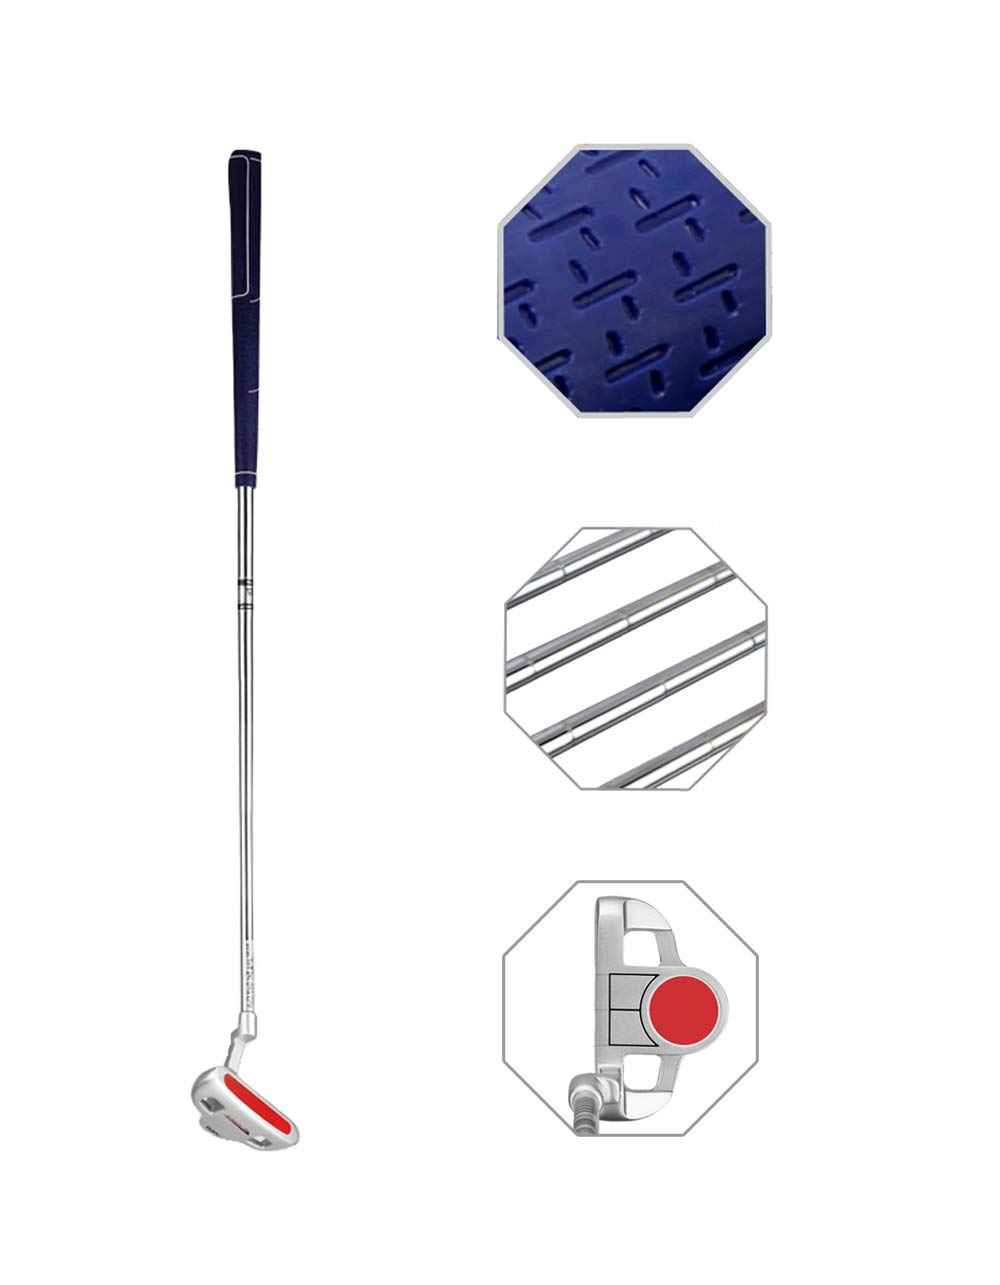 EnjoyCool Junior Golf Putter Stainless Steel Kids Putter Right Handed for Kids Ages 3-5(Red Head+Blue Grip, 25inch,Age 3-5)